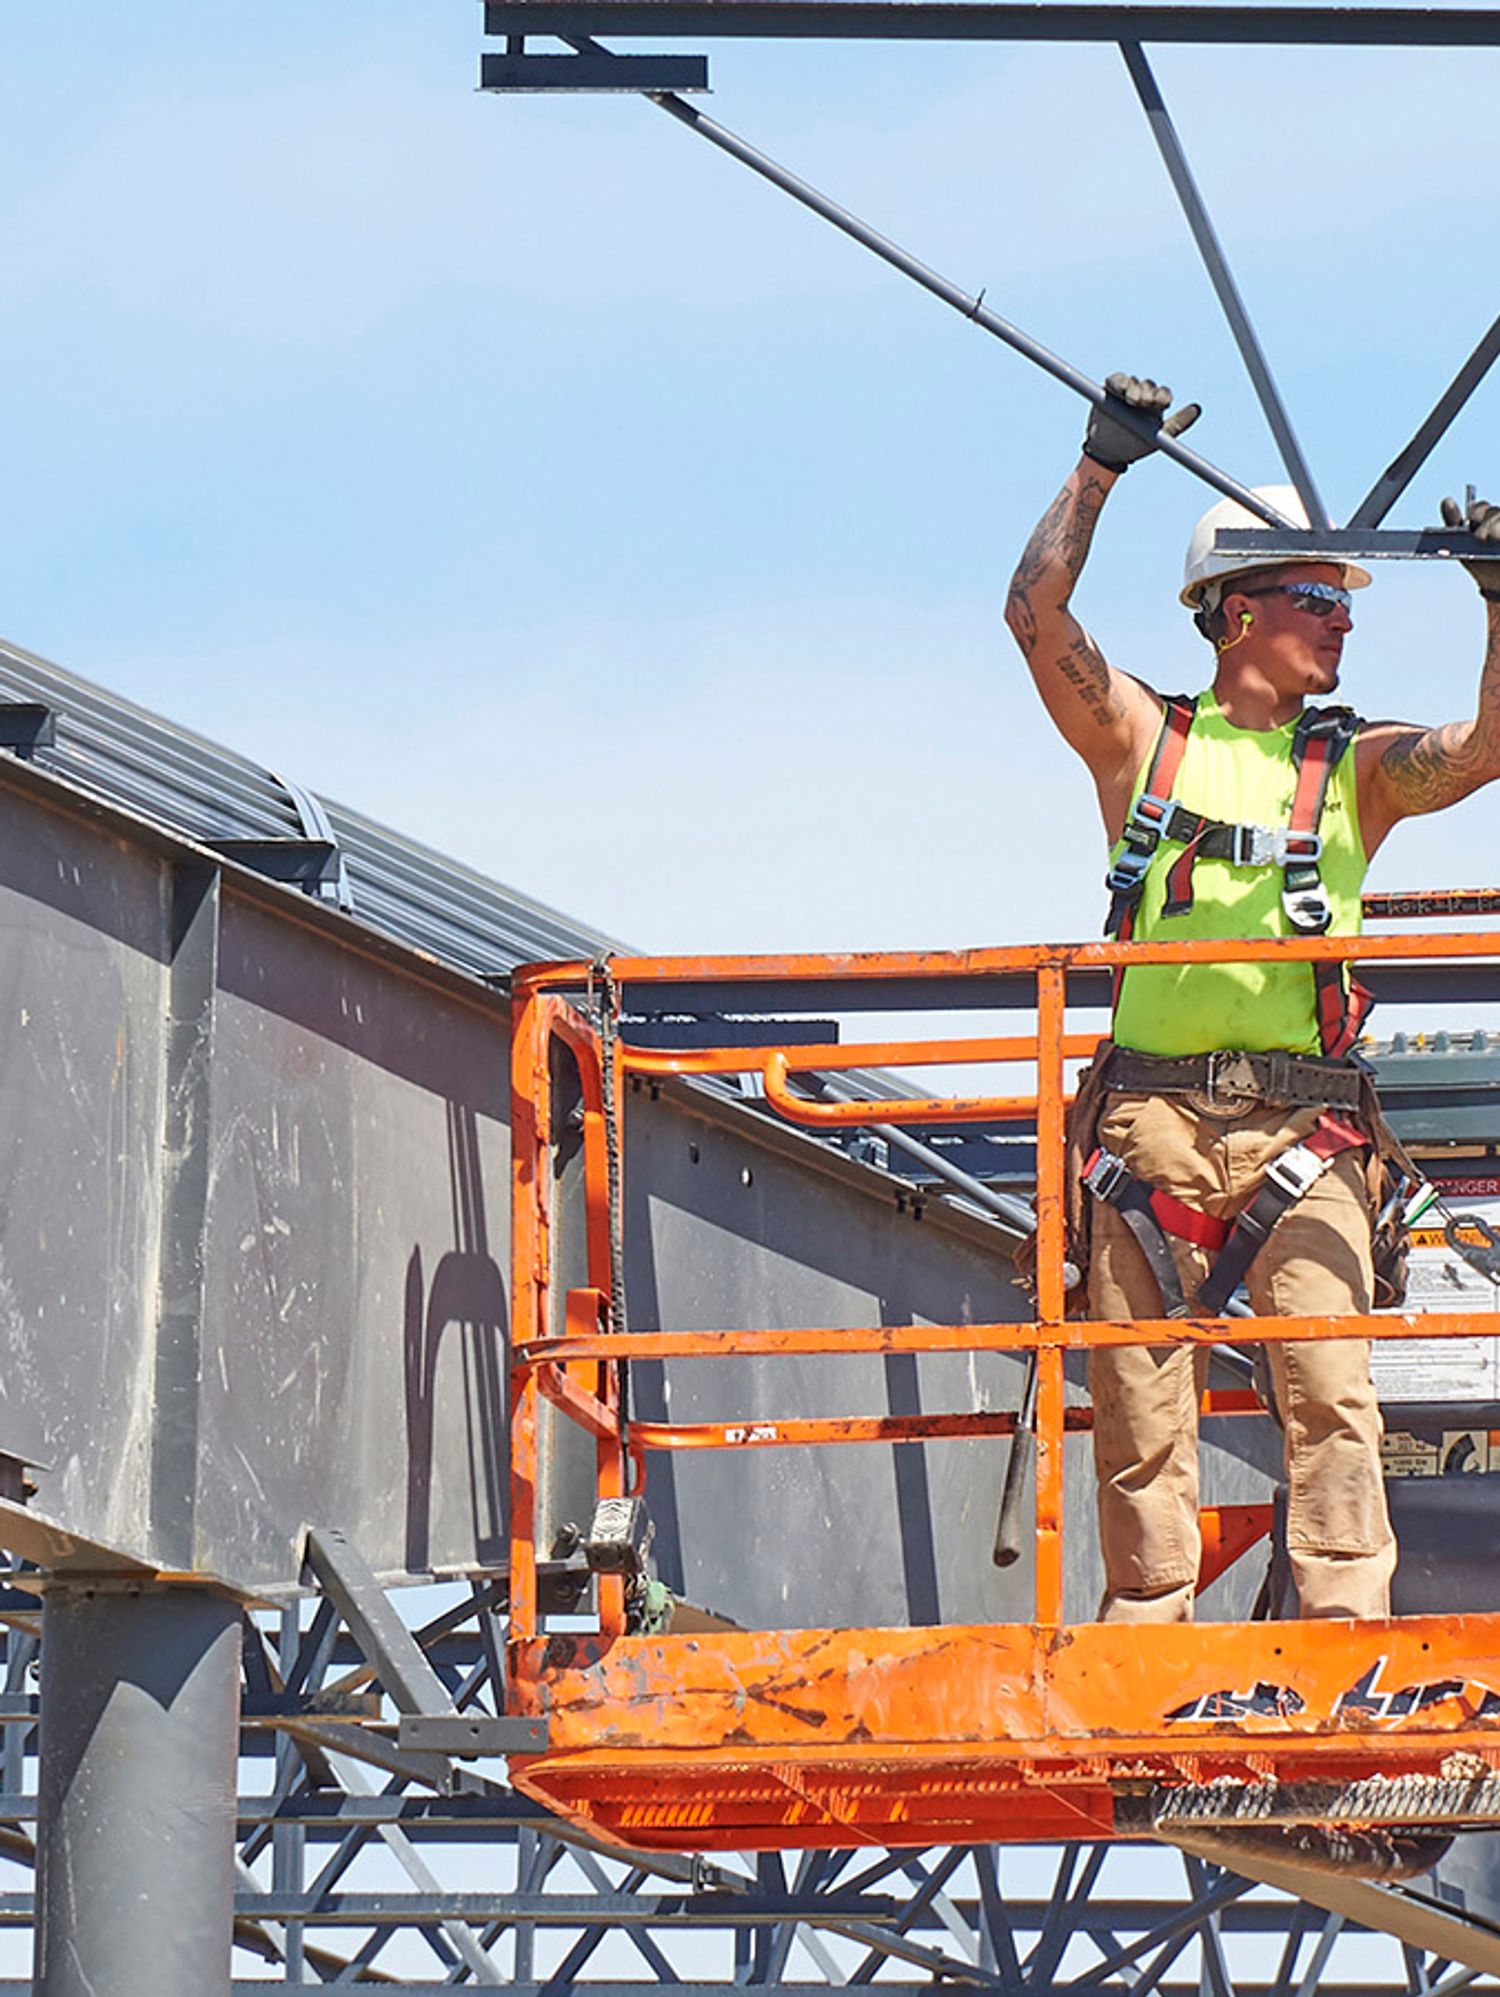 Fall Protection continues to top list of OSHA violations